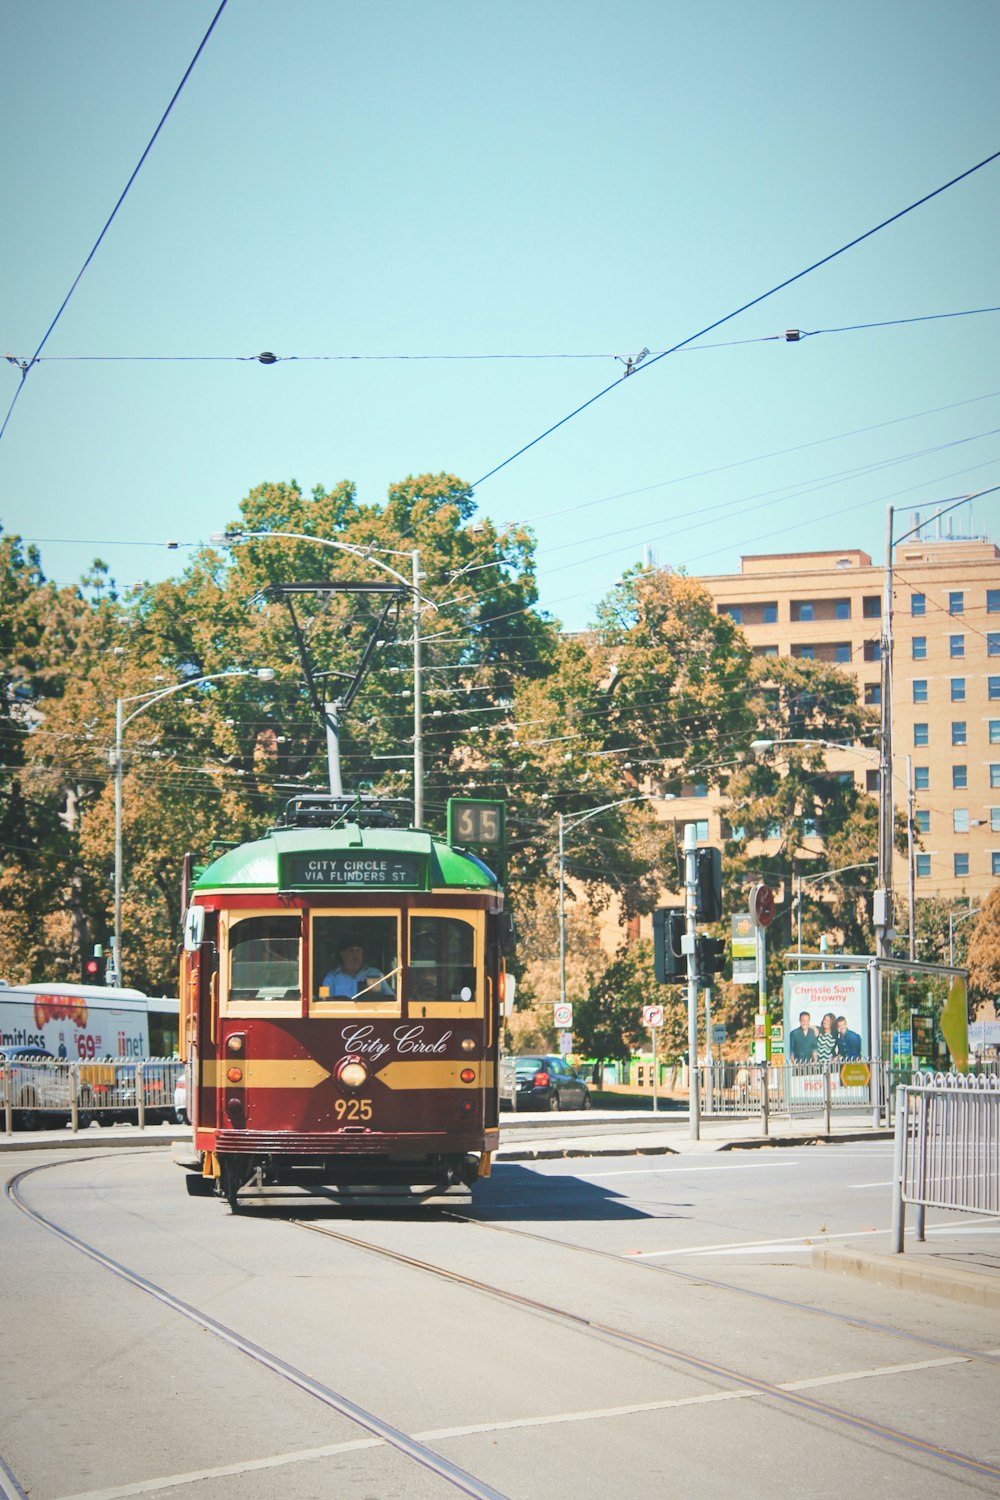 yellow and red tram on road during daytime